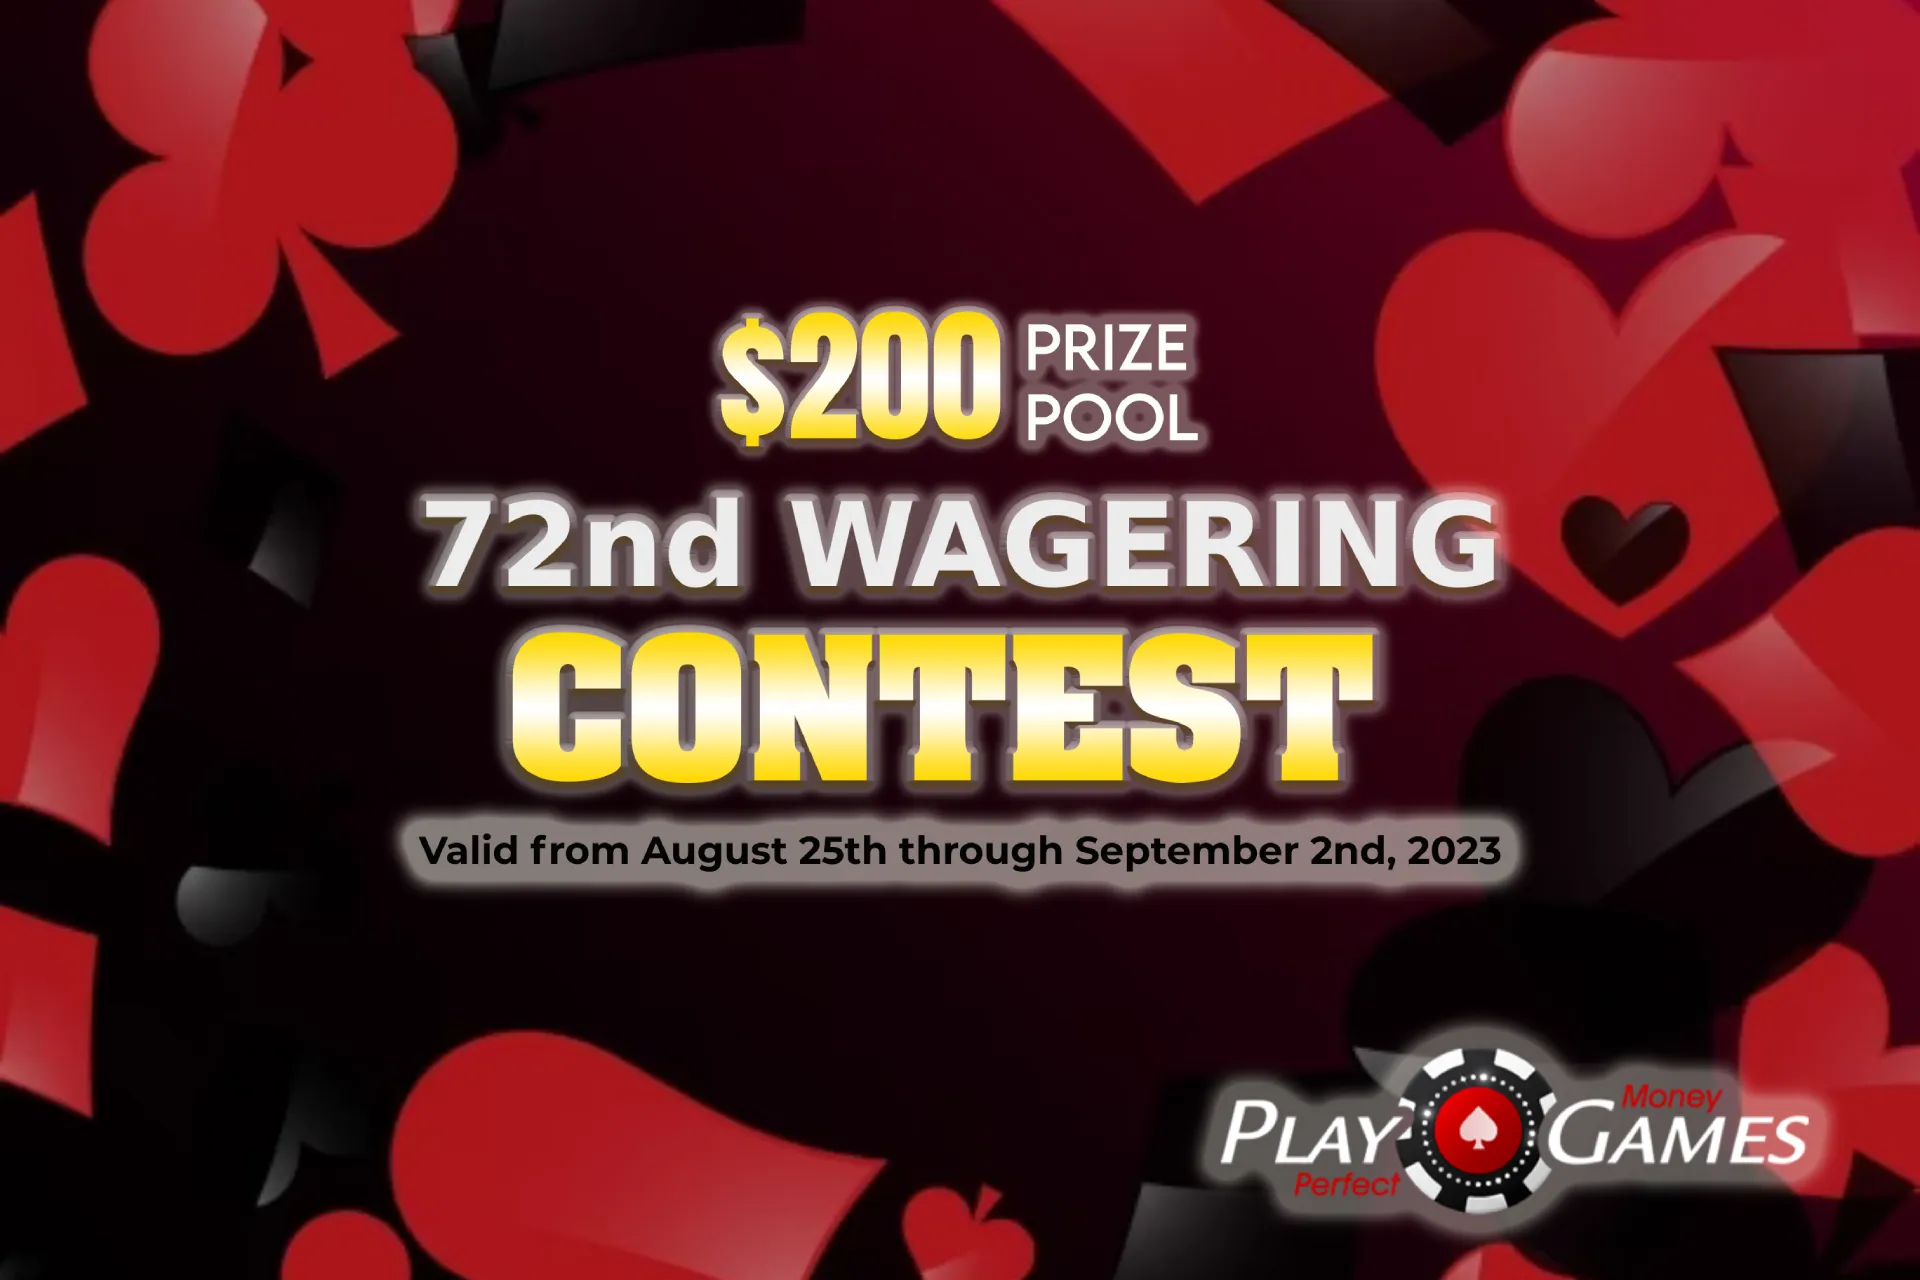 Play Like a High Roller on PPMG’s 72nd Wagering Contest